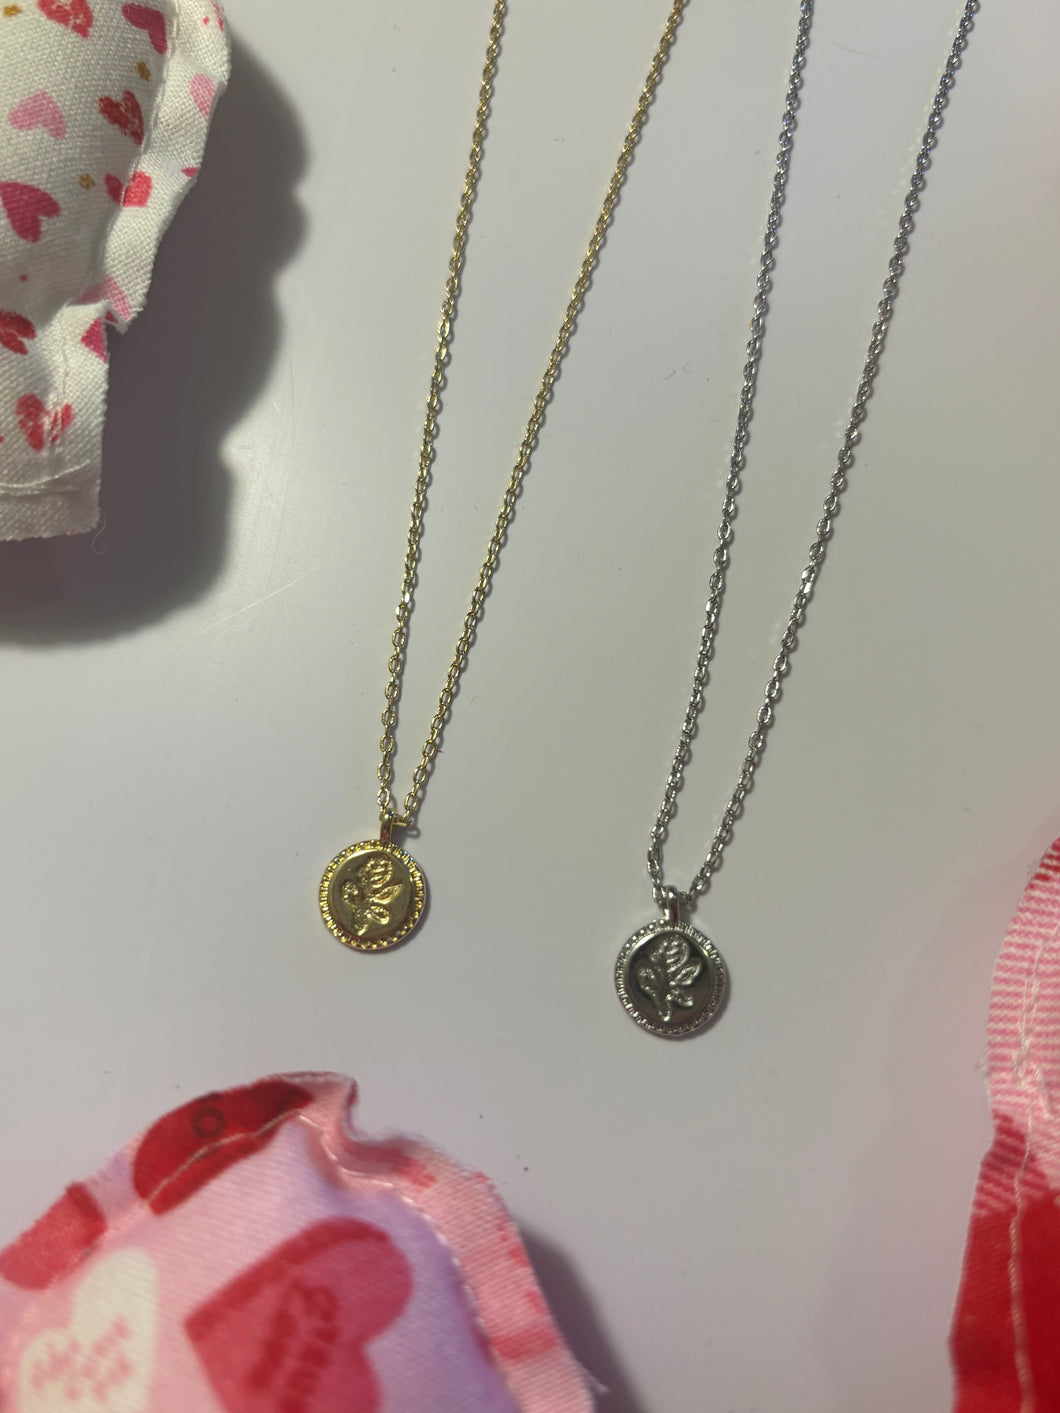 Rose Necklace